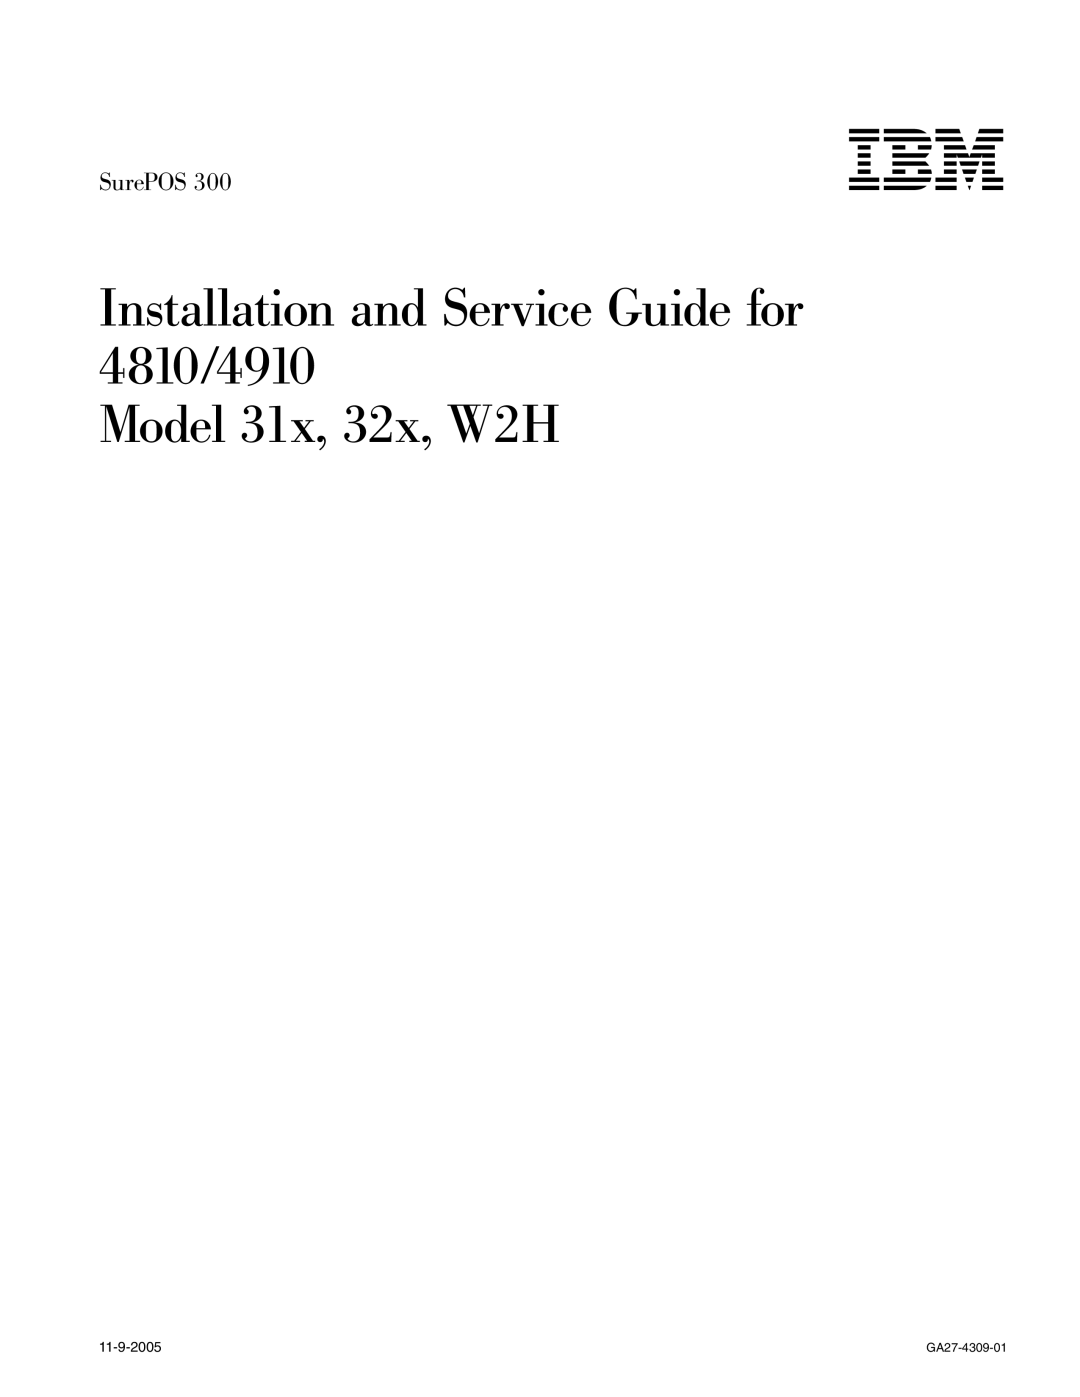 IBM manual Installation and Service Guide for 4810/4910 Model 31x, 32x, W2H, SurePOS, 11-9-2005, GA27-4309-01 